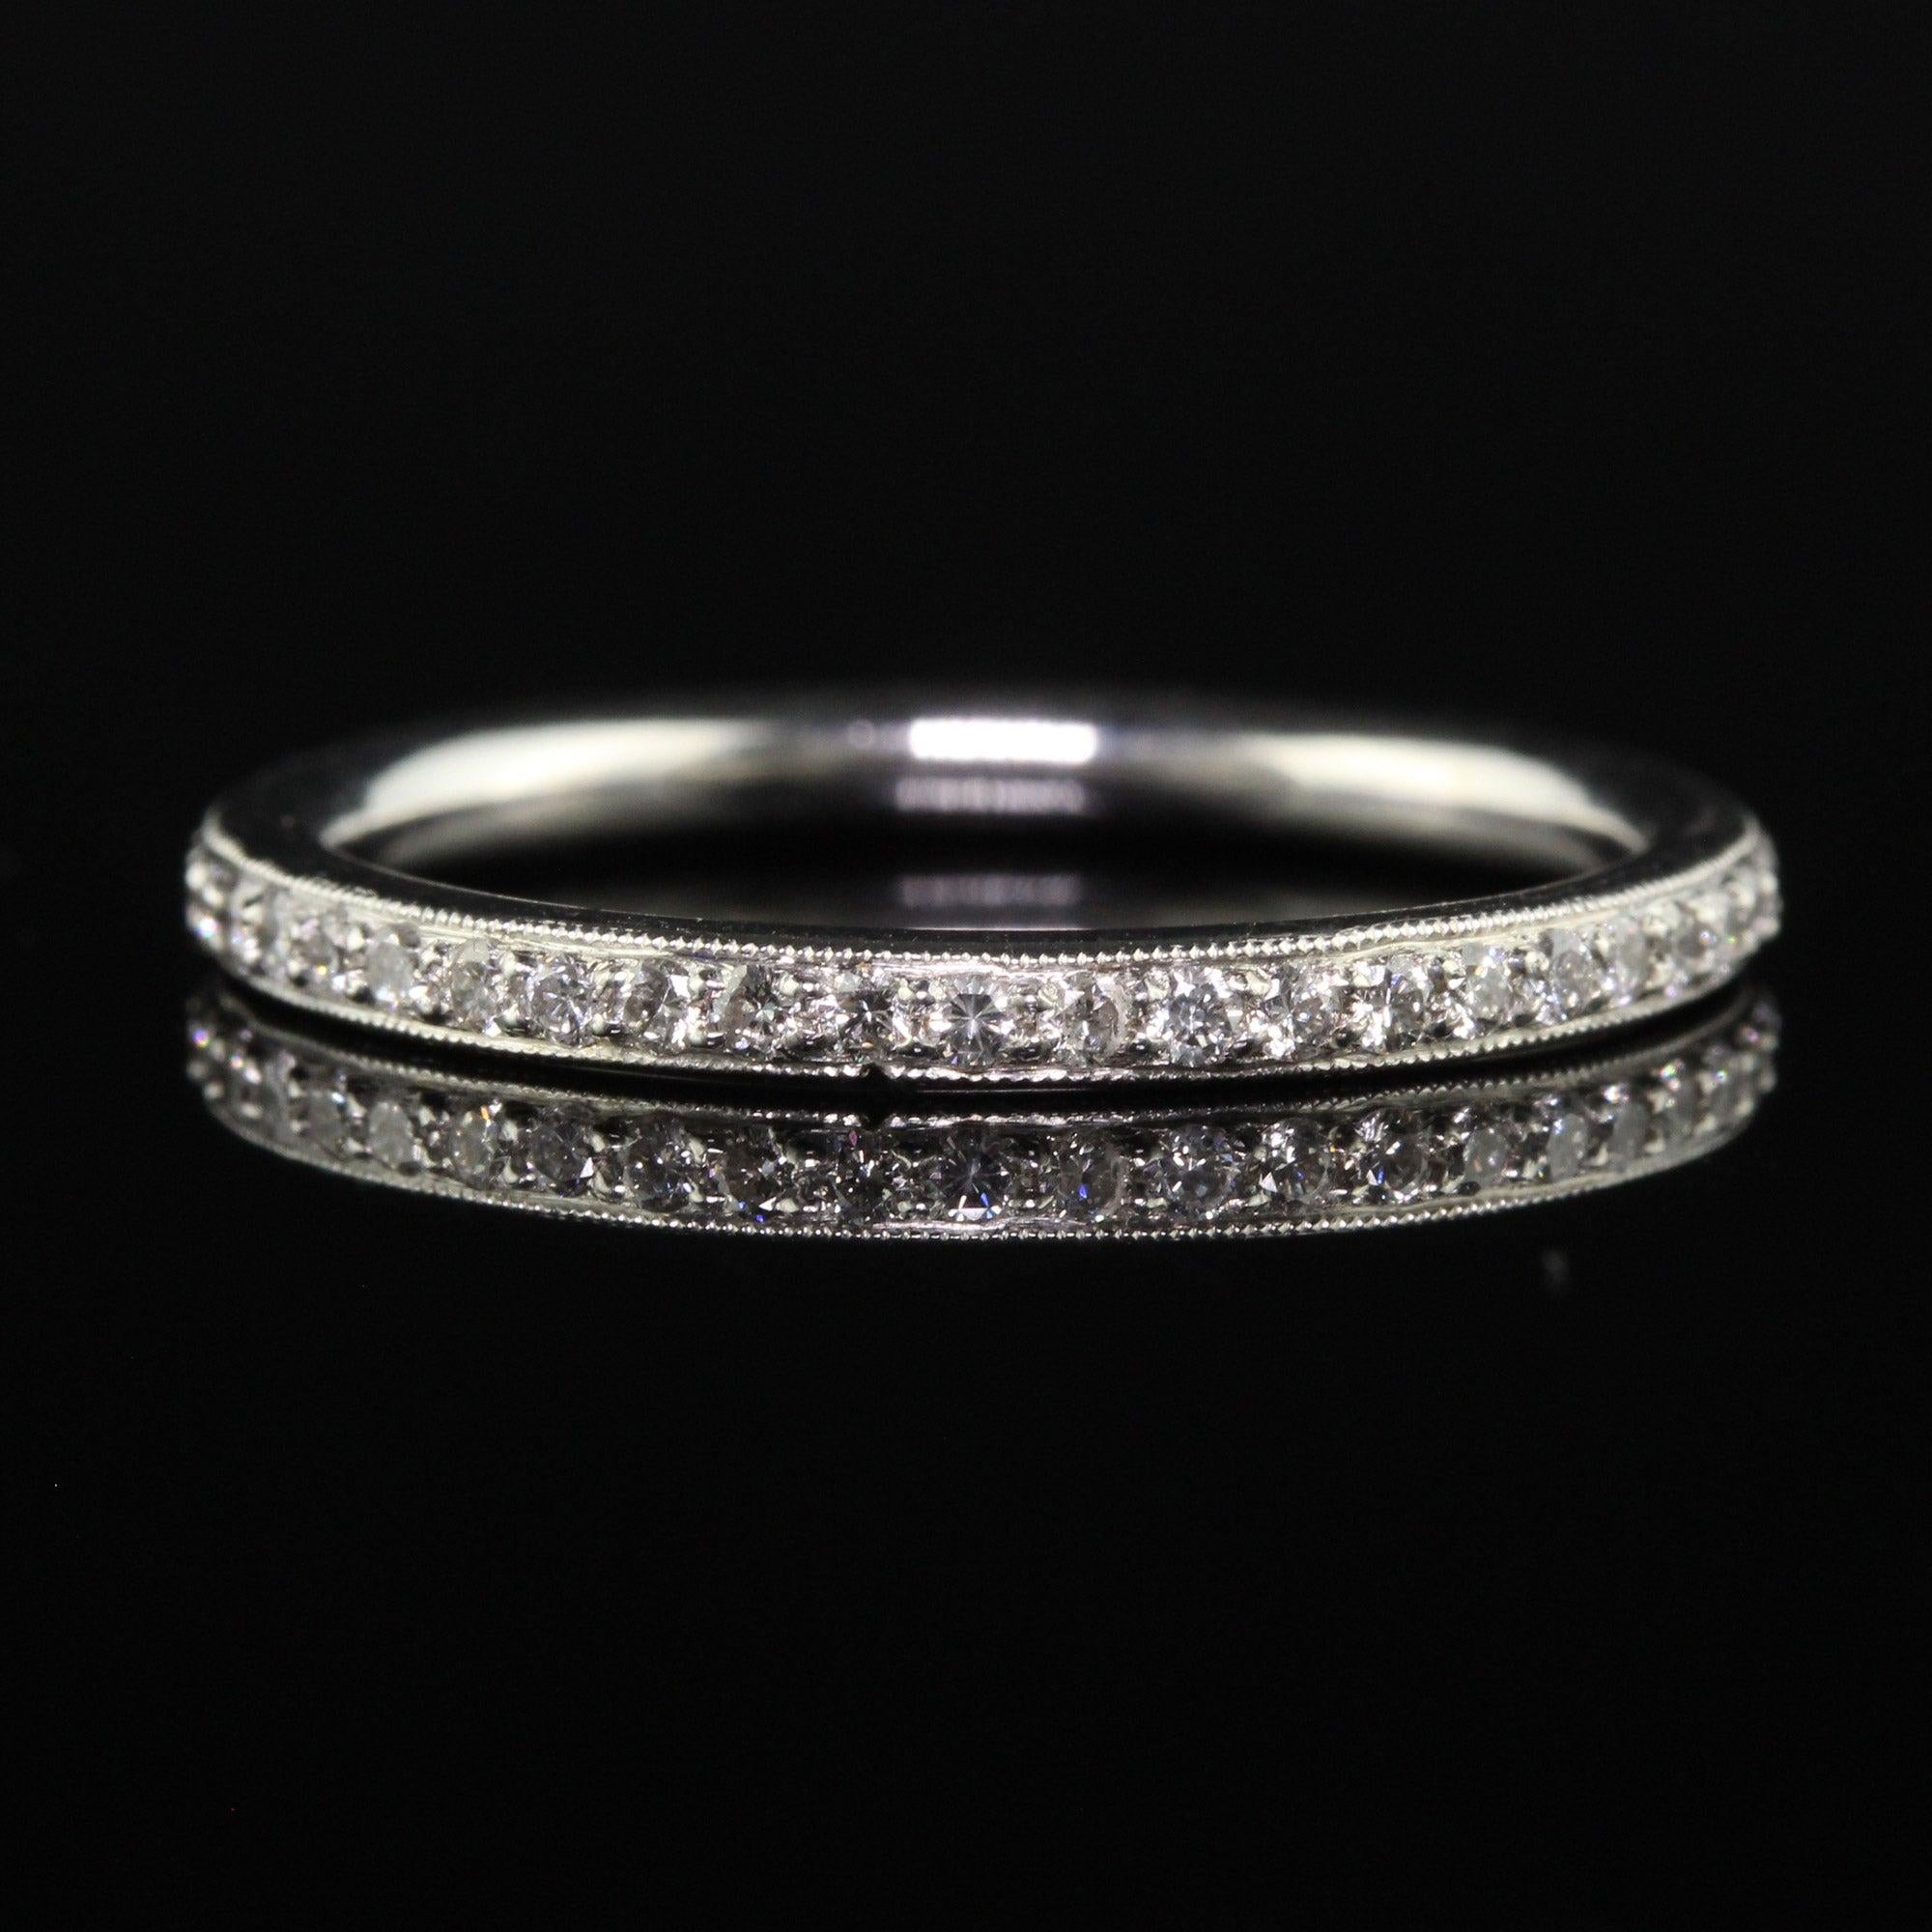 Vintage 18K White Gold Round Cut Eternity Wedding Band - Size 7 In Good Condition For Sale In Great Neck, NY